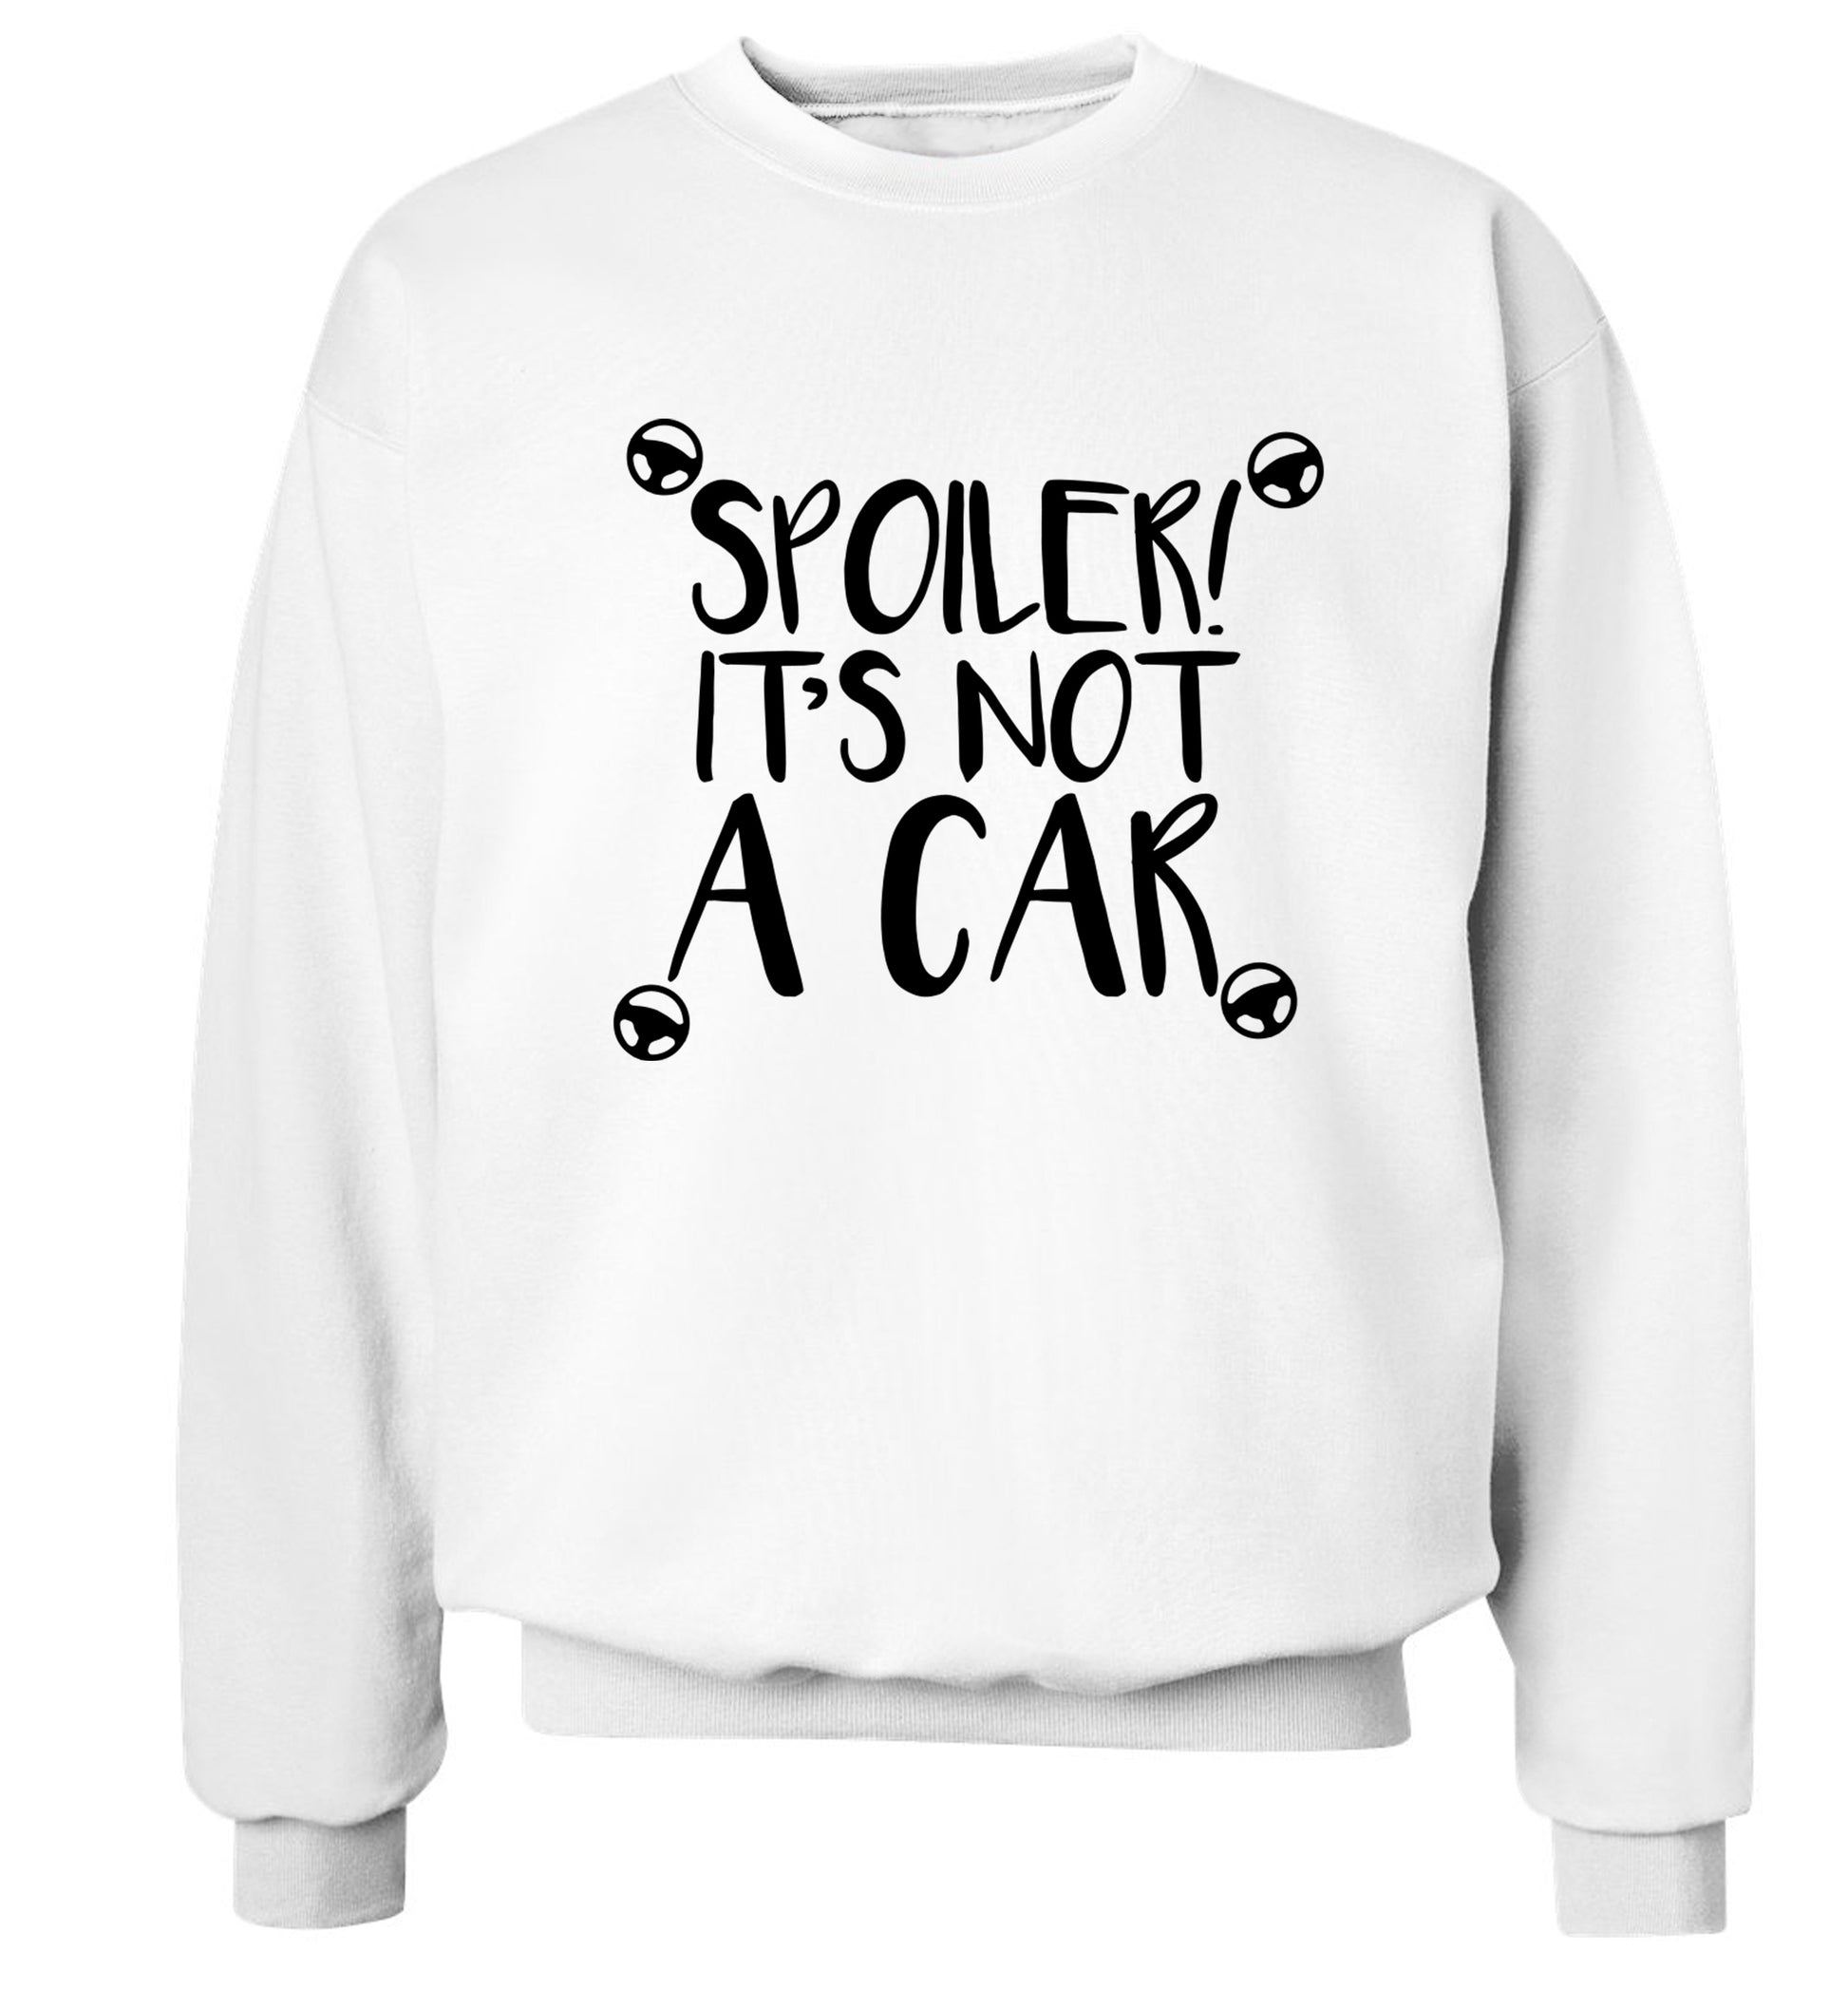 Spoiler it's not a car Adult's unisex white Sweater 2XL